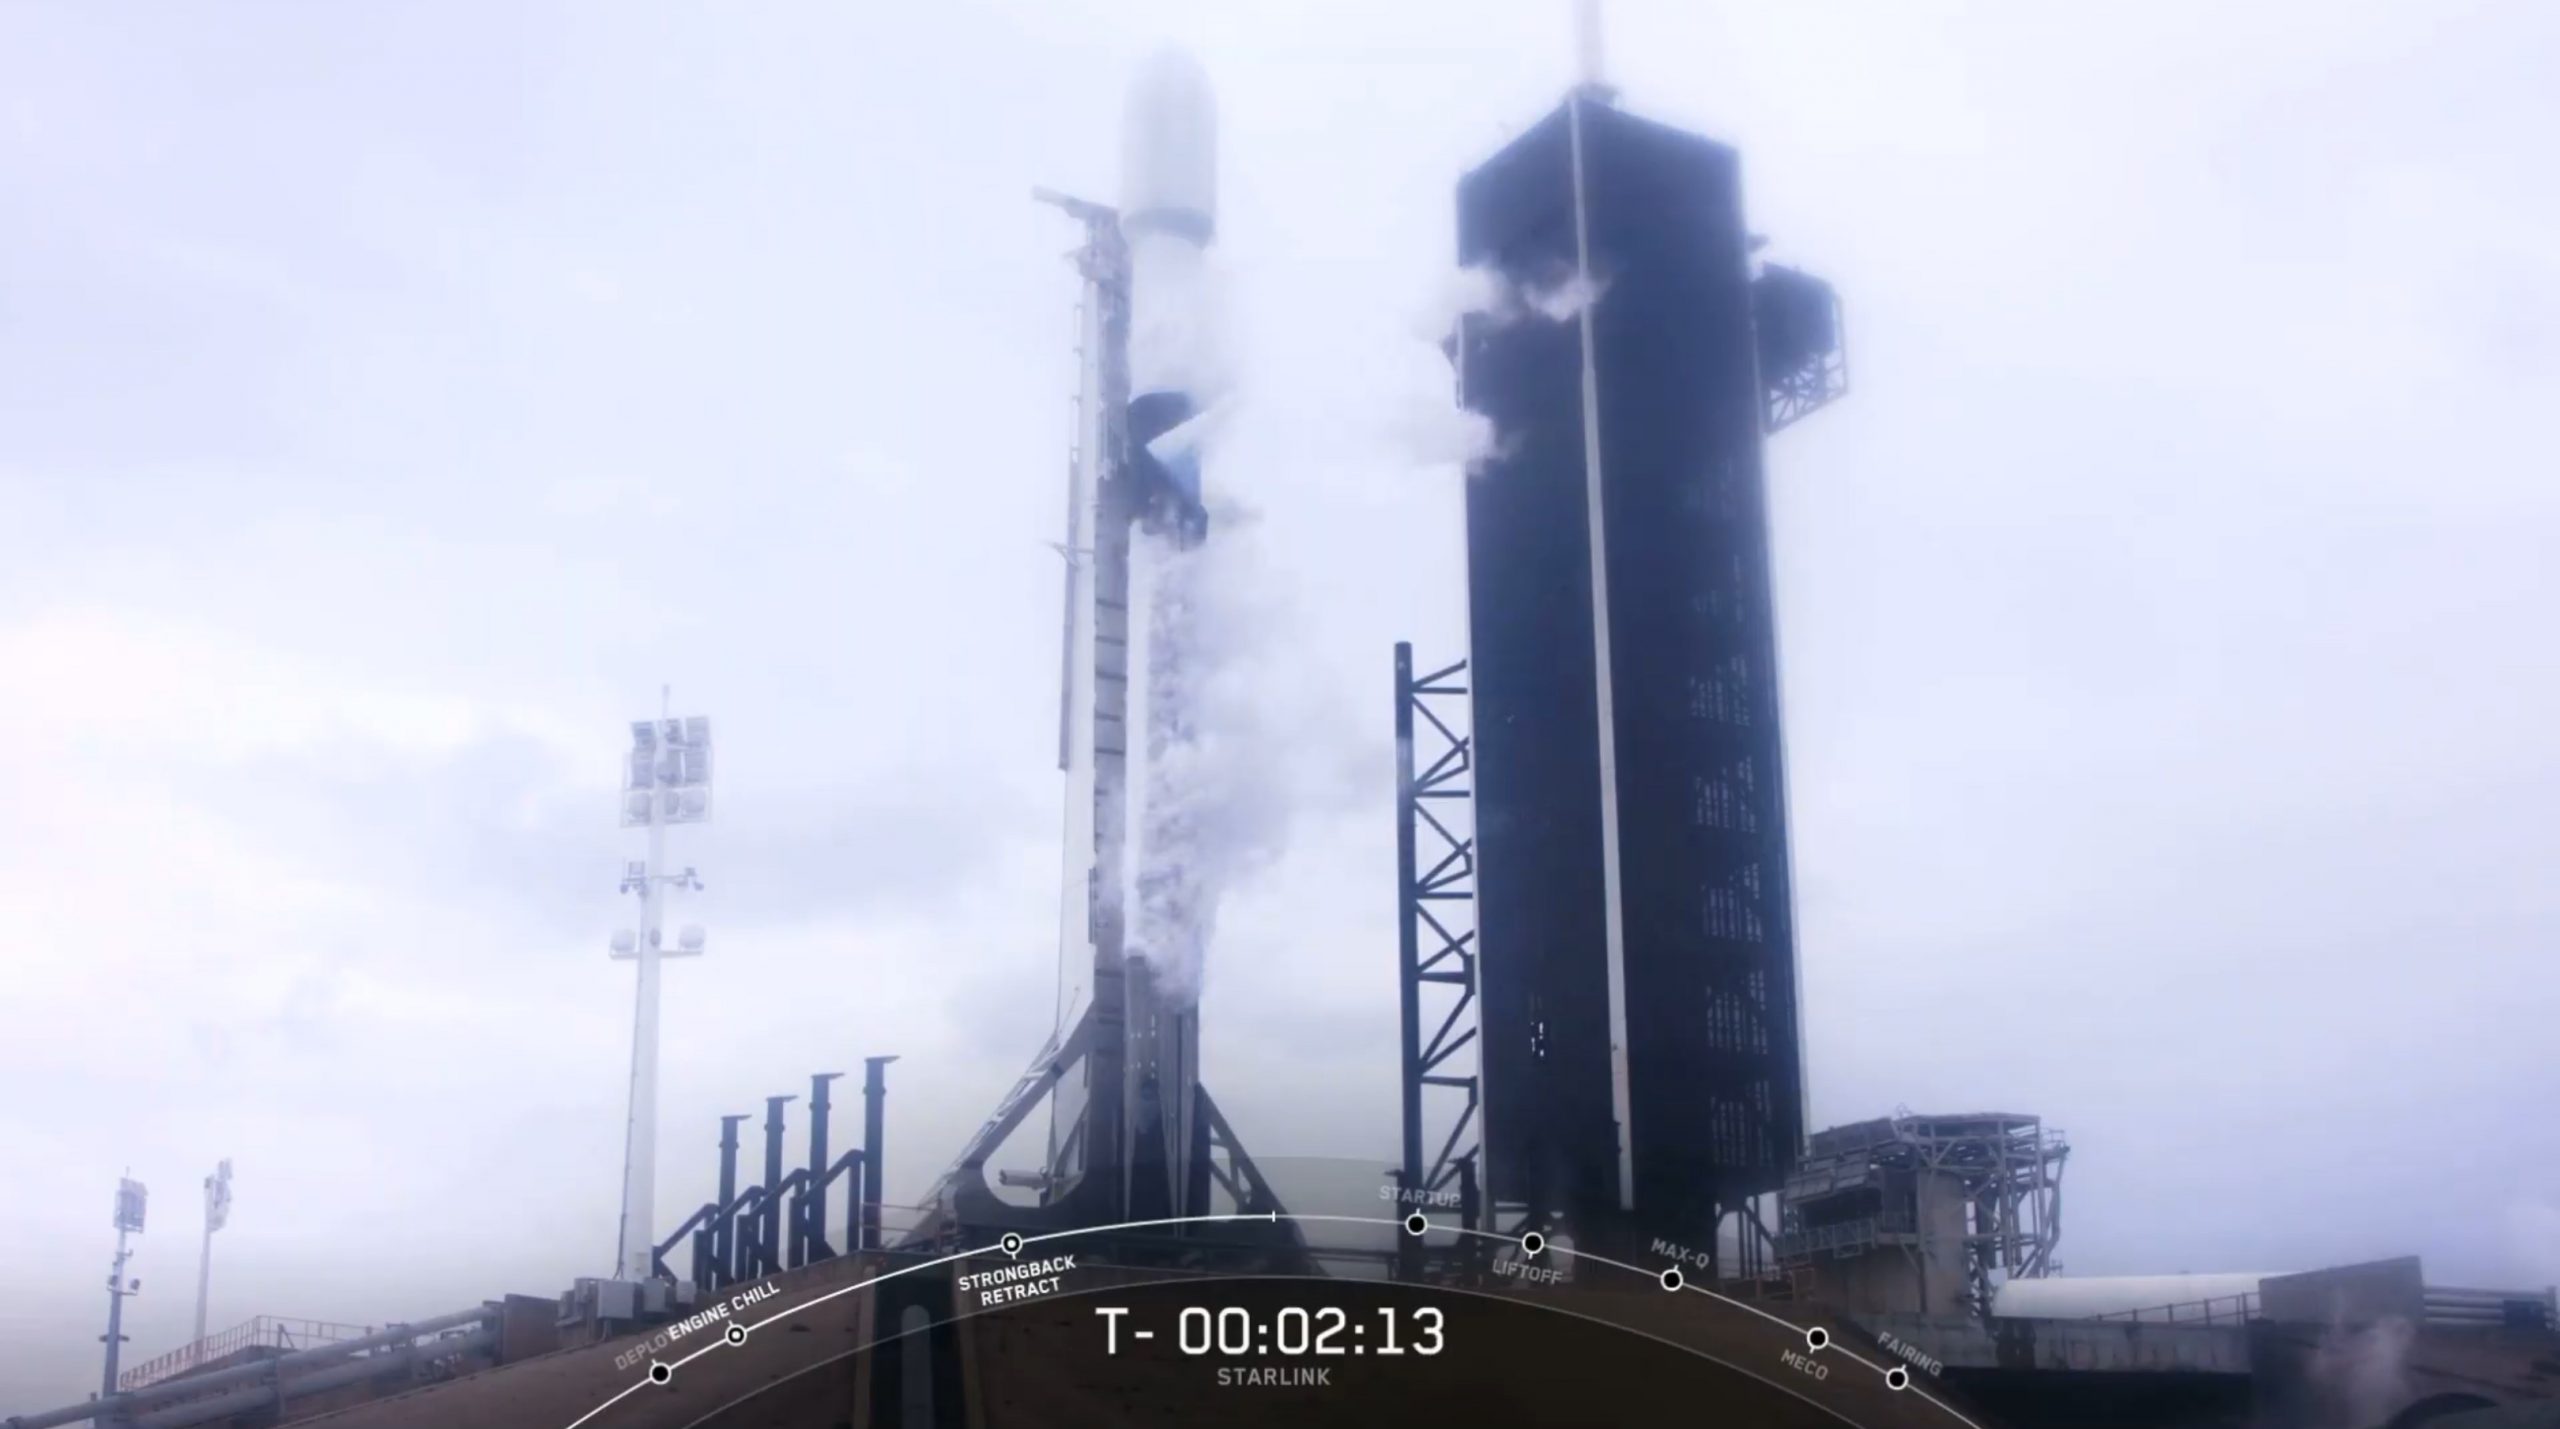 Starlink-12 Falcon 9 B1058 Pad 39A 092820 webcast (SpaceX) 4